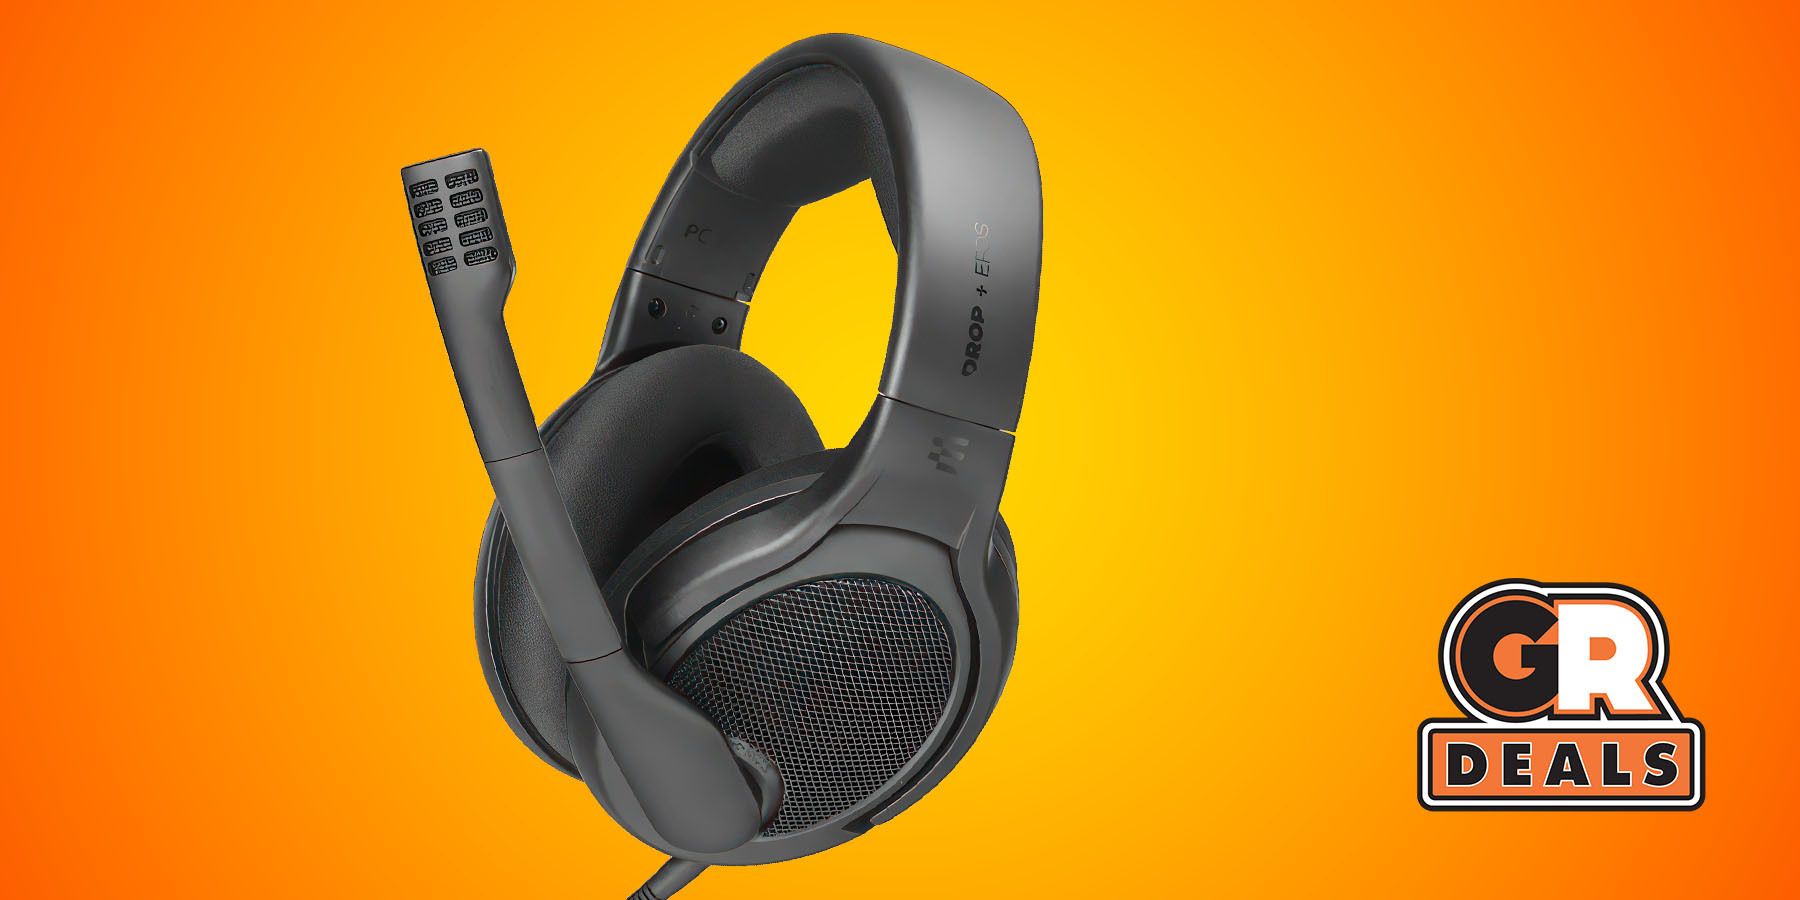 Don’t Miss Your Chance to Get Drop + EPOS PC38X Gaming Headset for 9